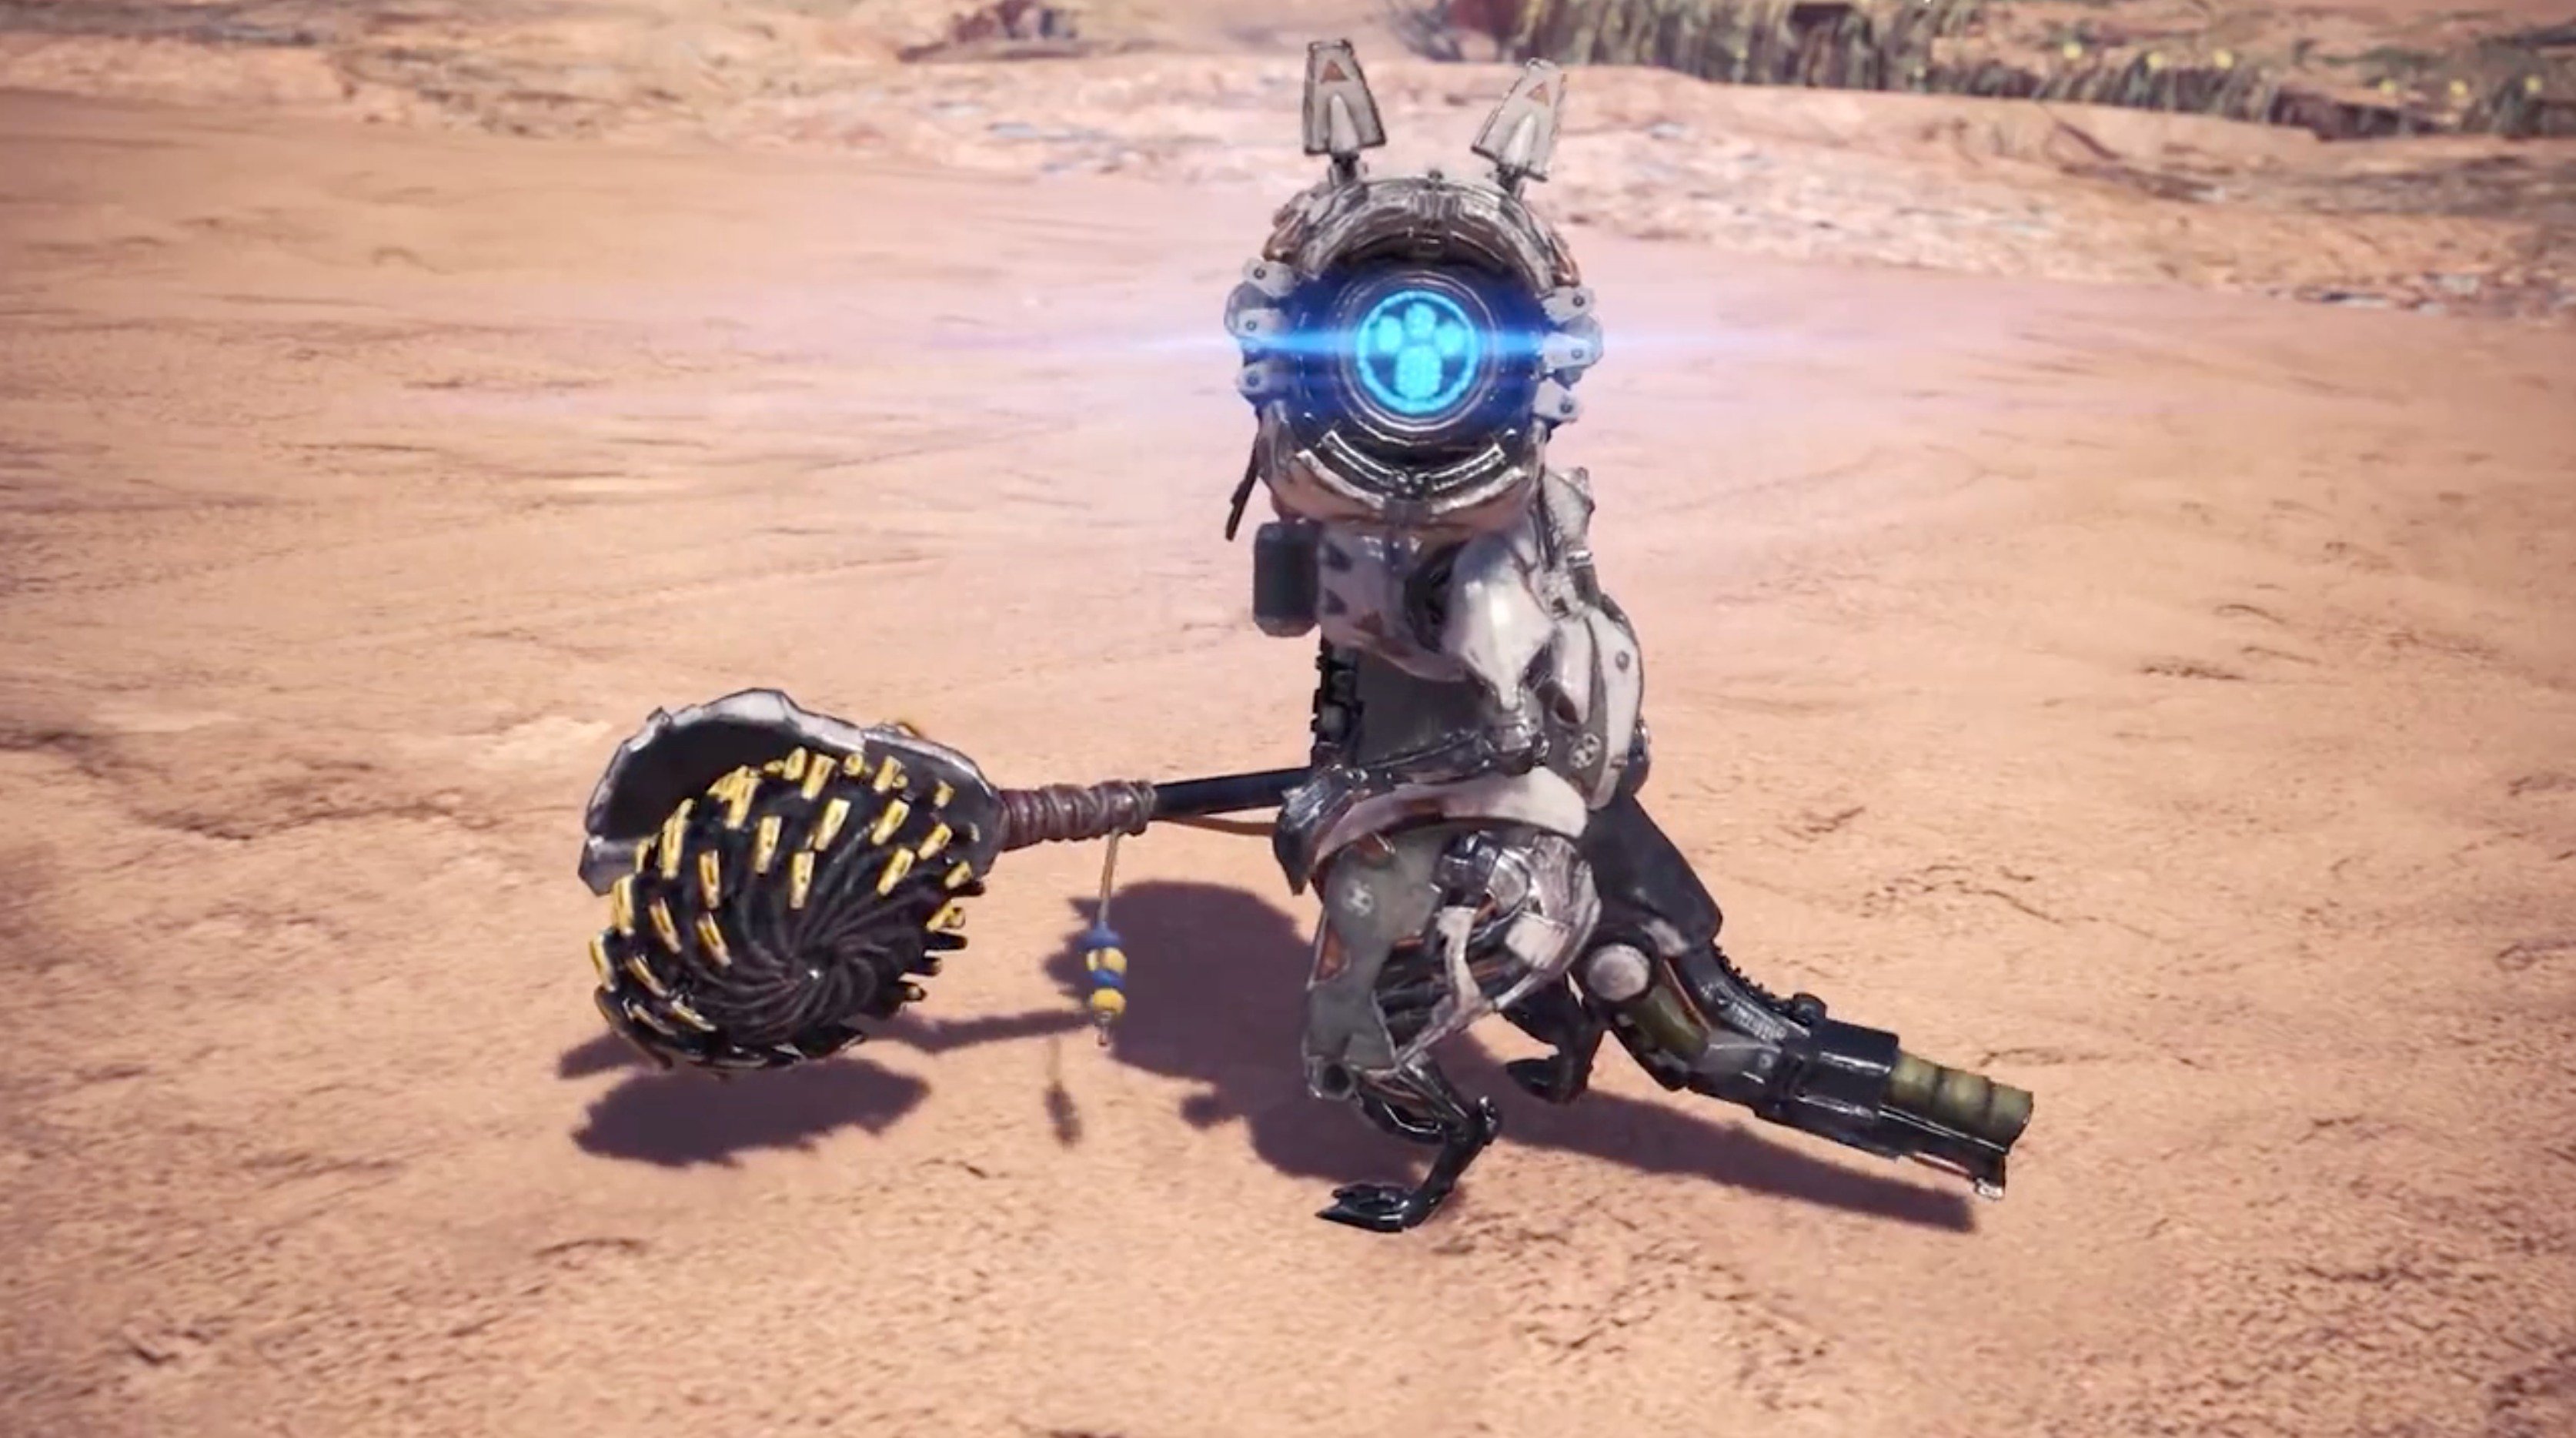 Playstation Looking For New Palico Armor In Monster Hunter World Play The Horizon Zero Dawn Event Until February 8 And Snag This Ps4 Exclusive Watcher Palico Set T Co Stjbakbk9f Twitter